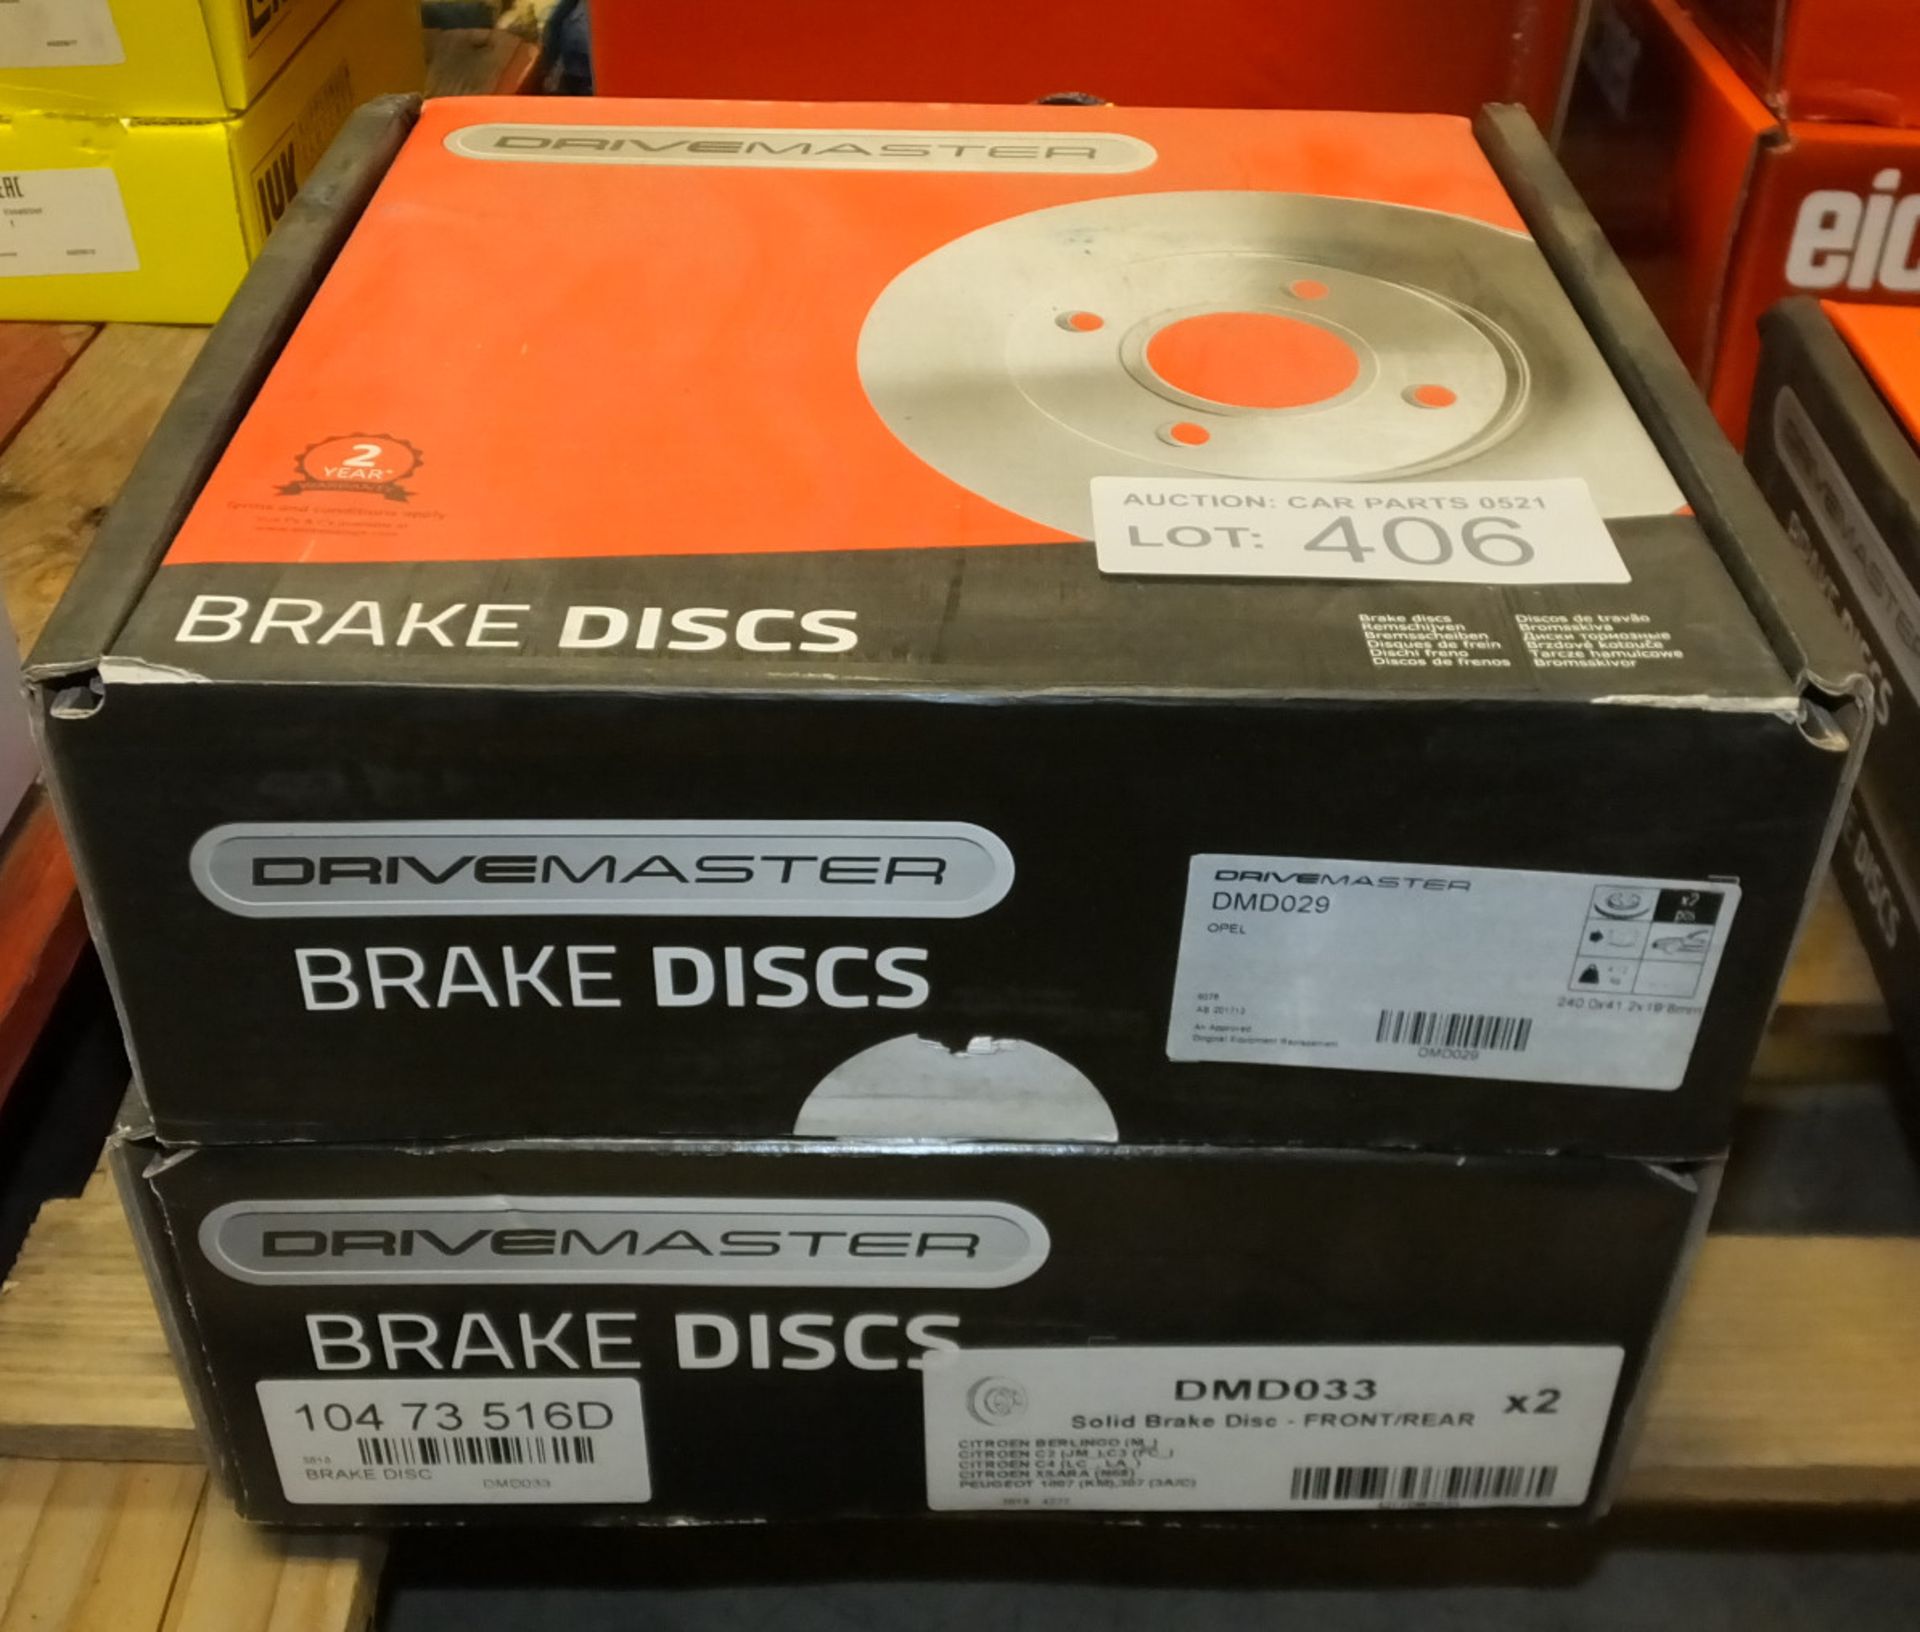 2x Drivemaster Brake Disc Sets - Please see pictures for model numbers